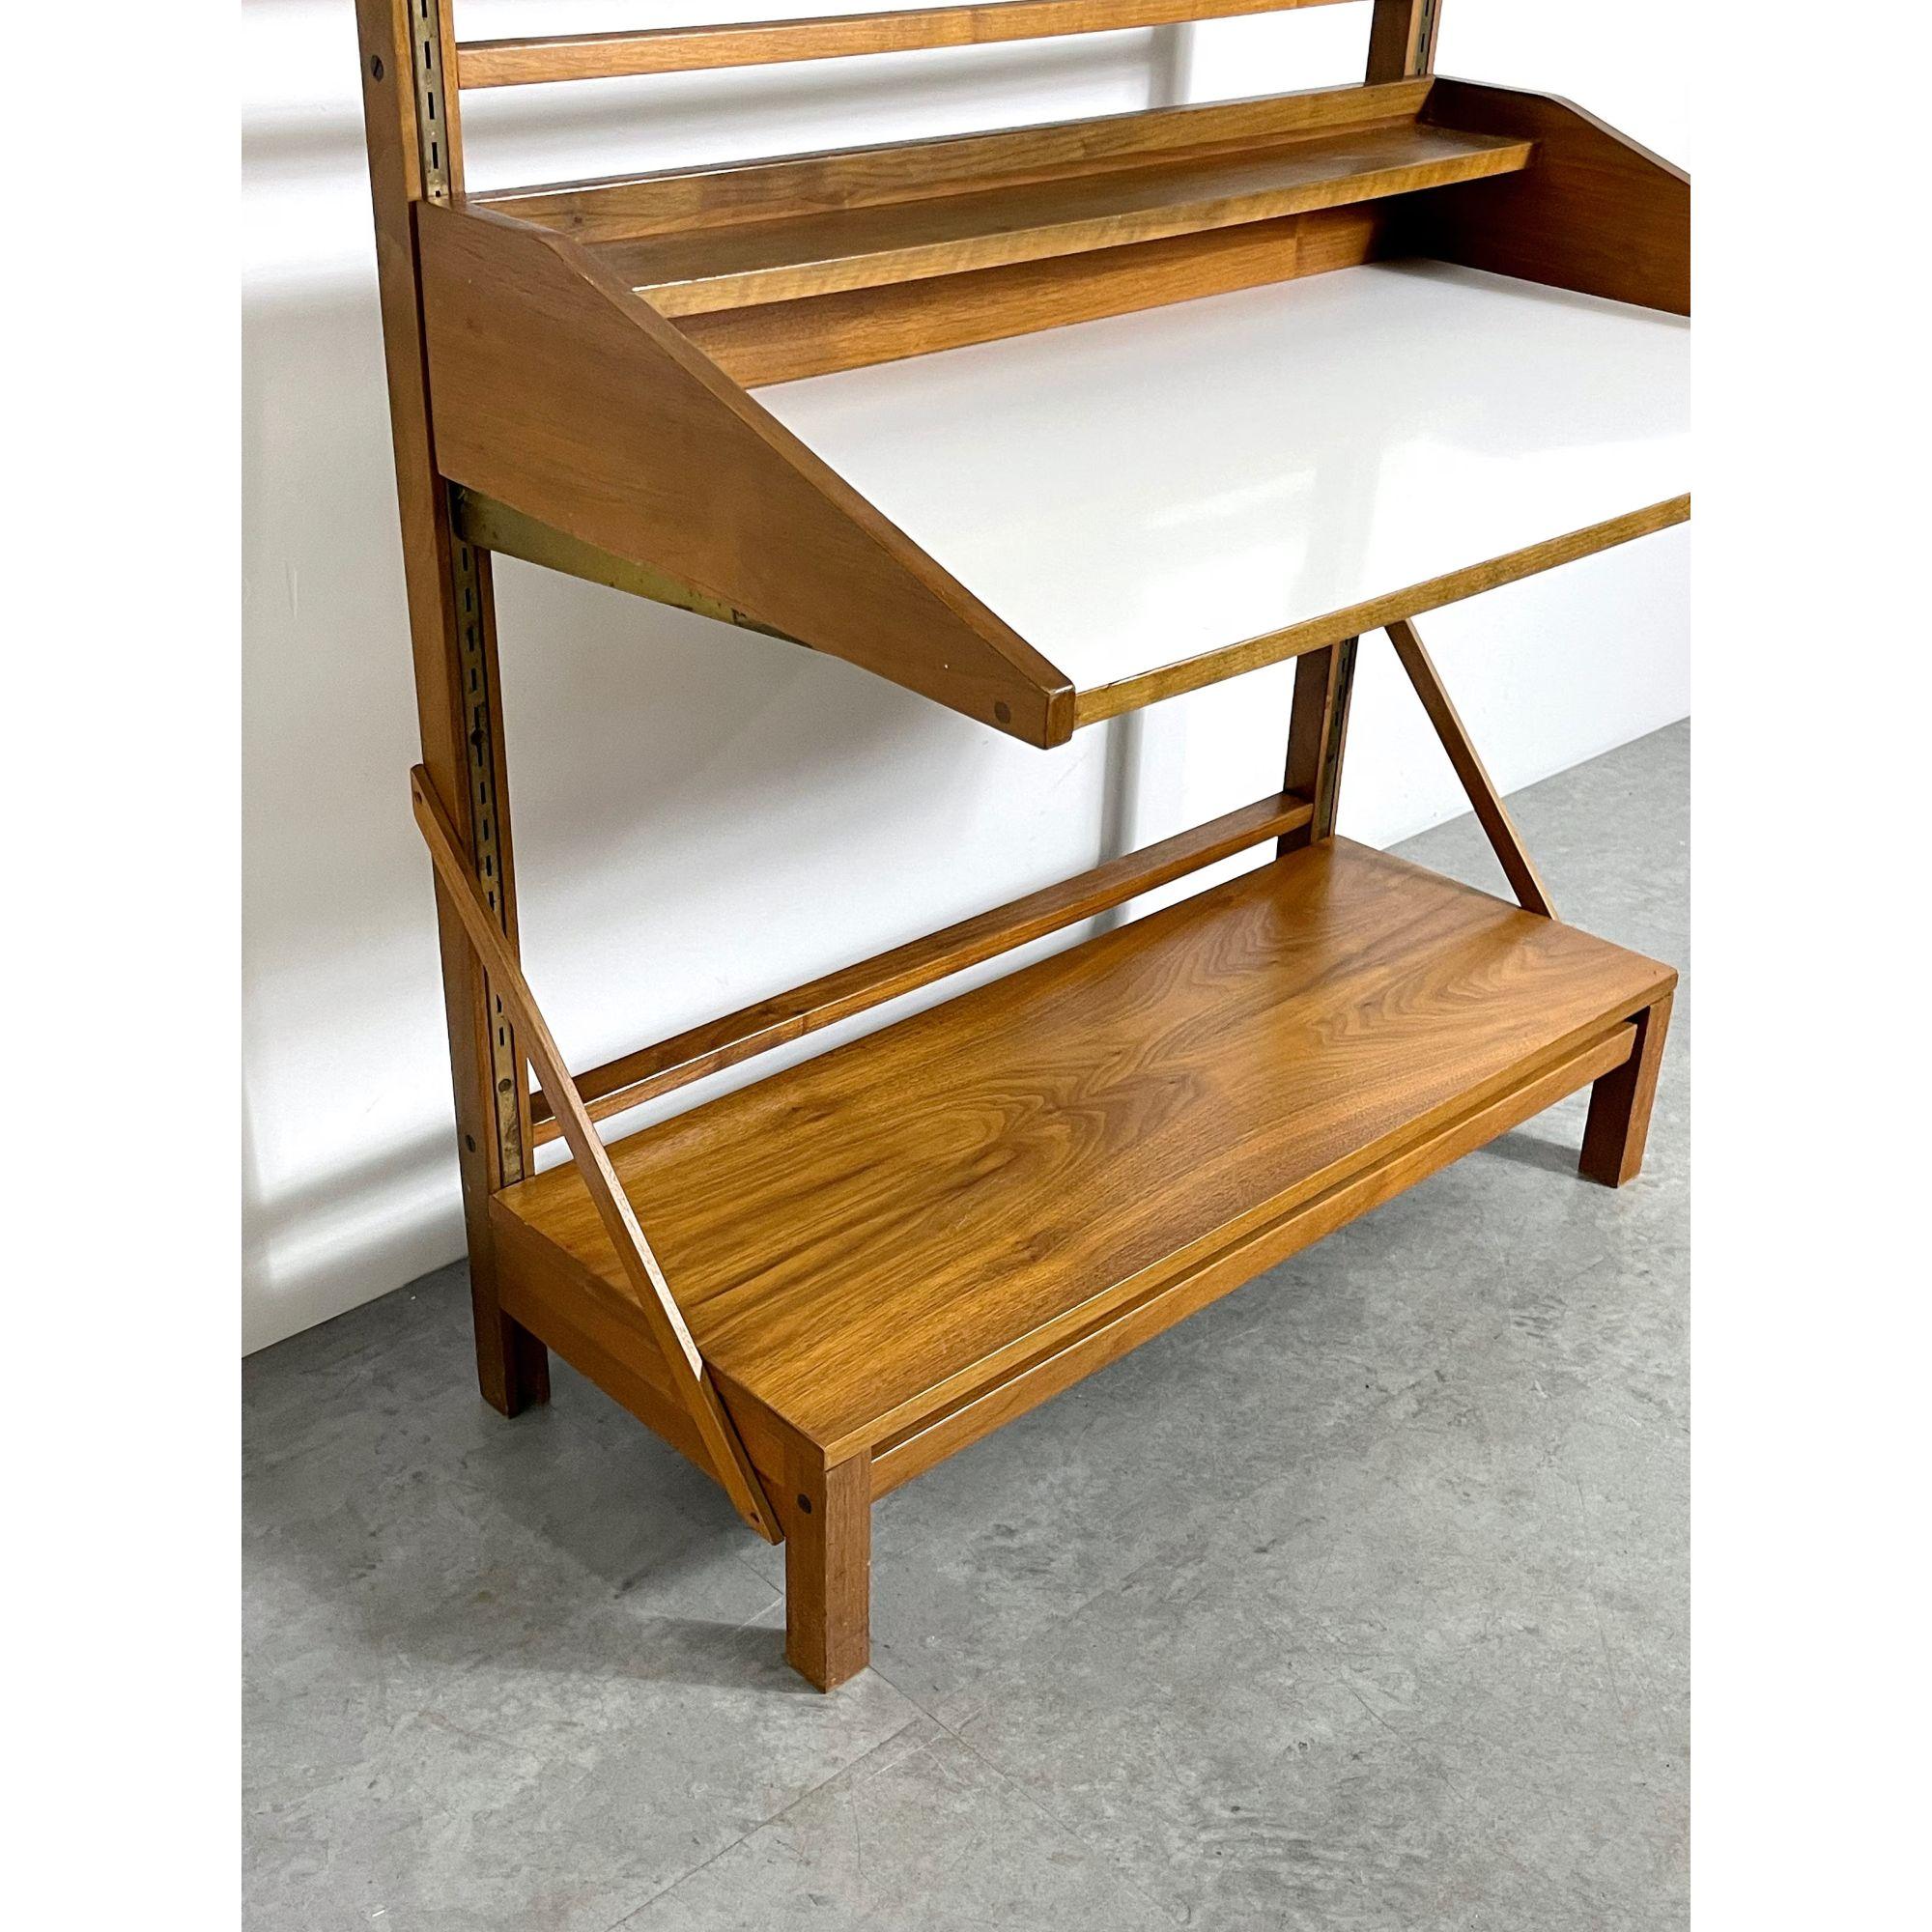 Laminated Mid Century Modern Vintage Freestanding Wall Unit Desk in Walnut, circa 1960s For Sale